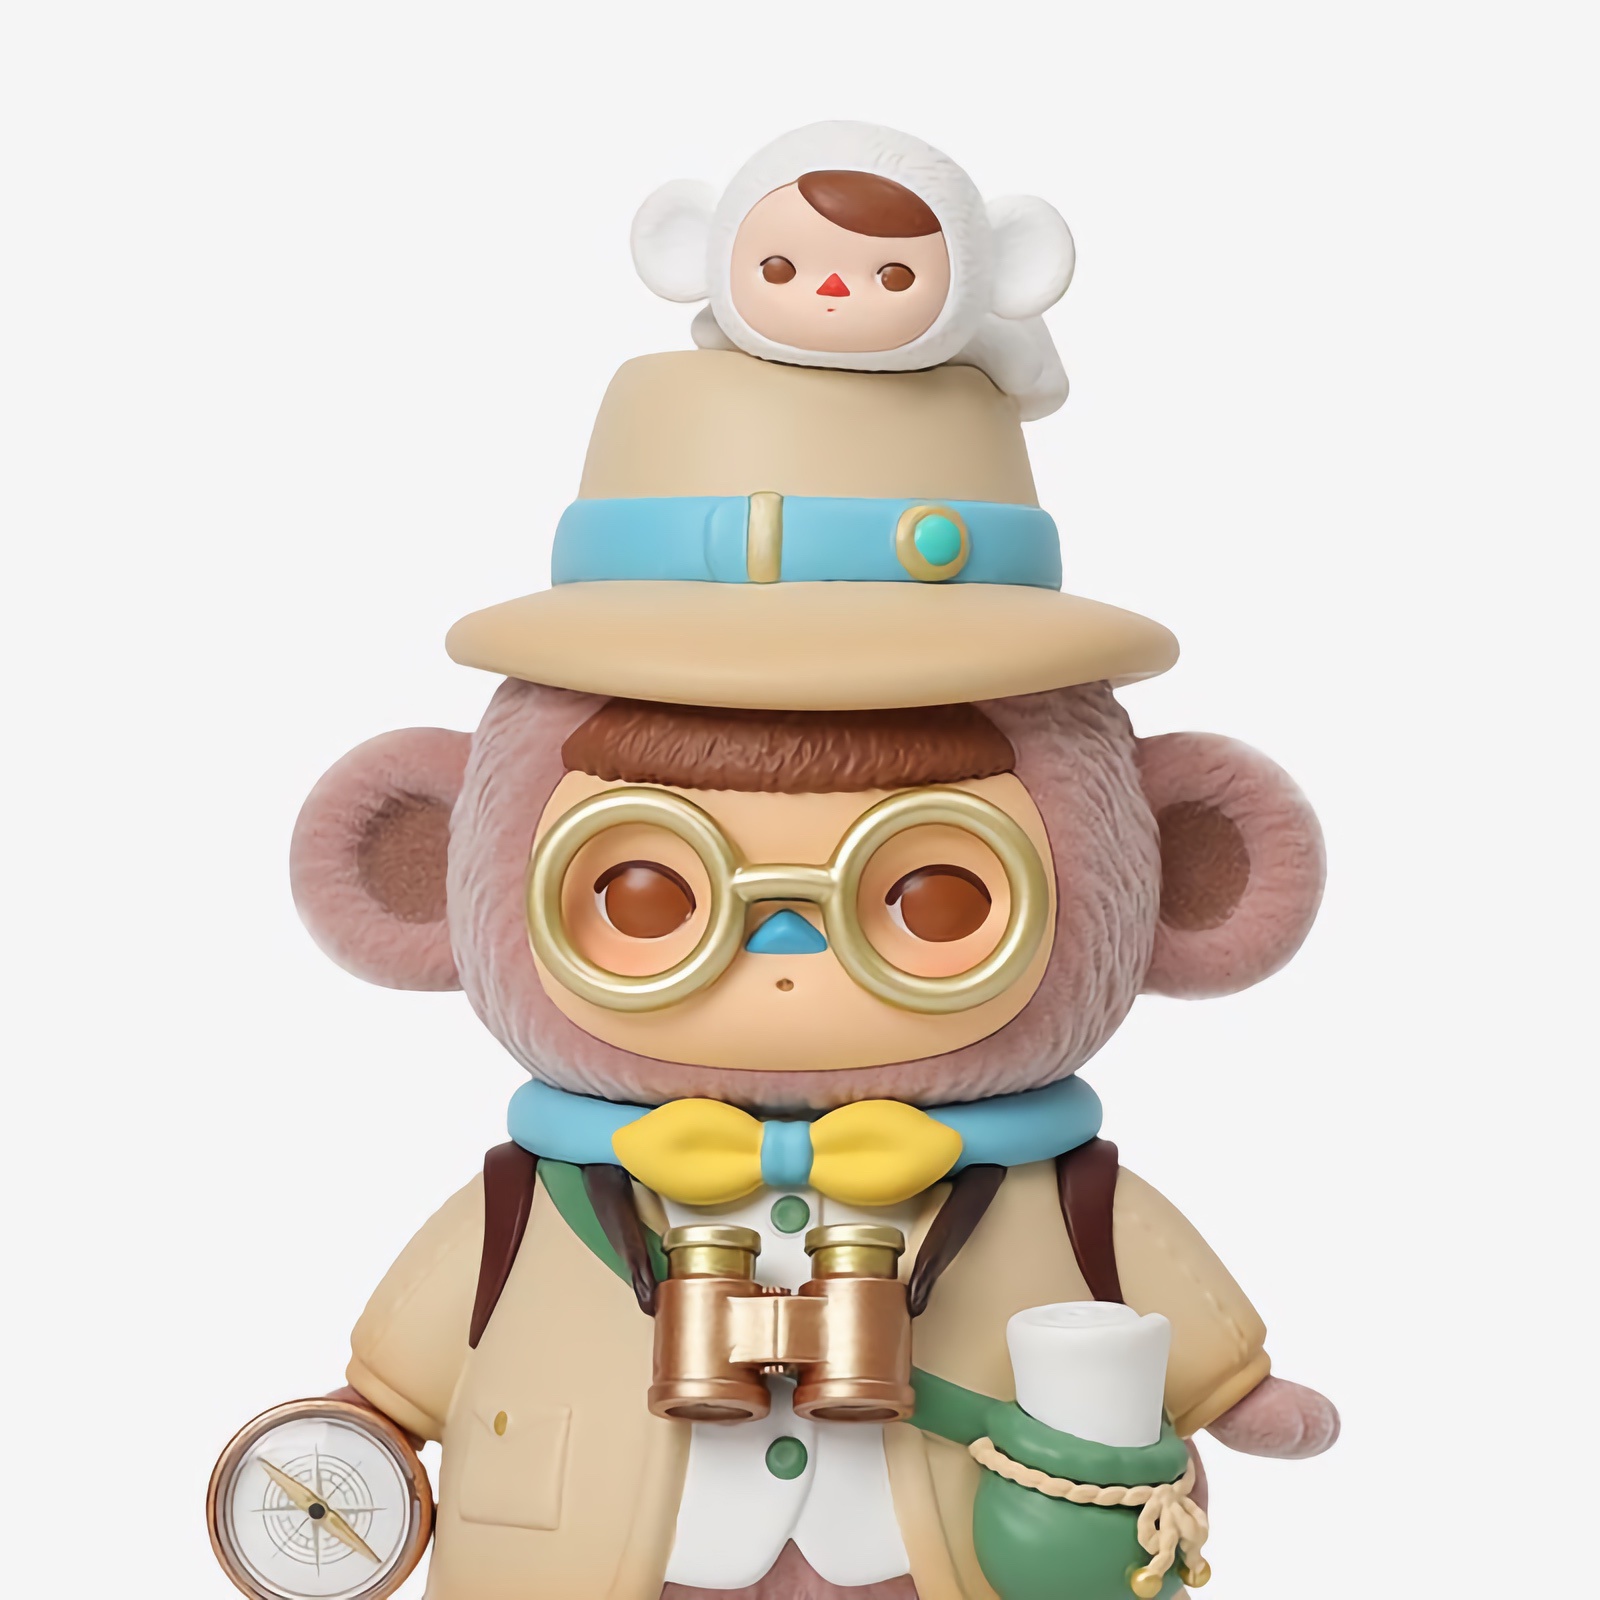 Monkey Archeologist Baby Figurine, Pop Mart Pucky, Action Figure, Action  Toy